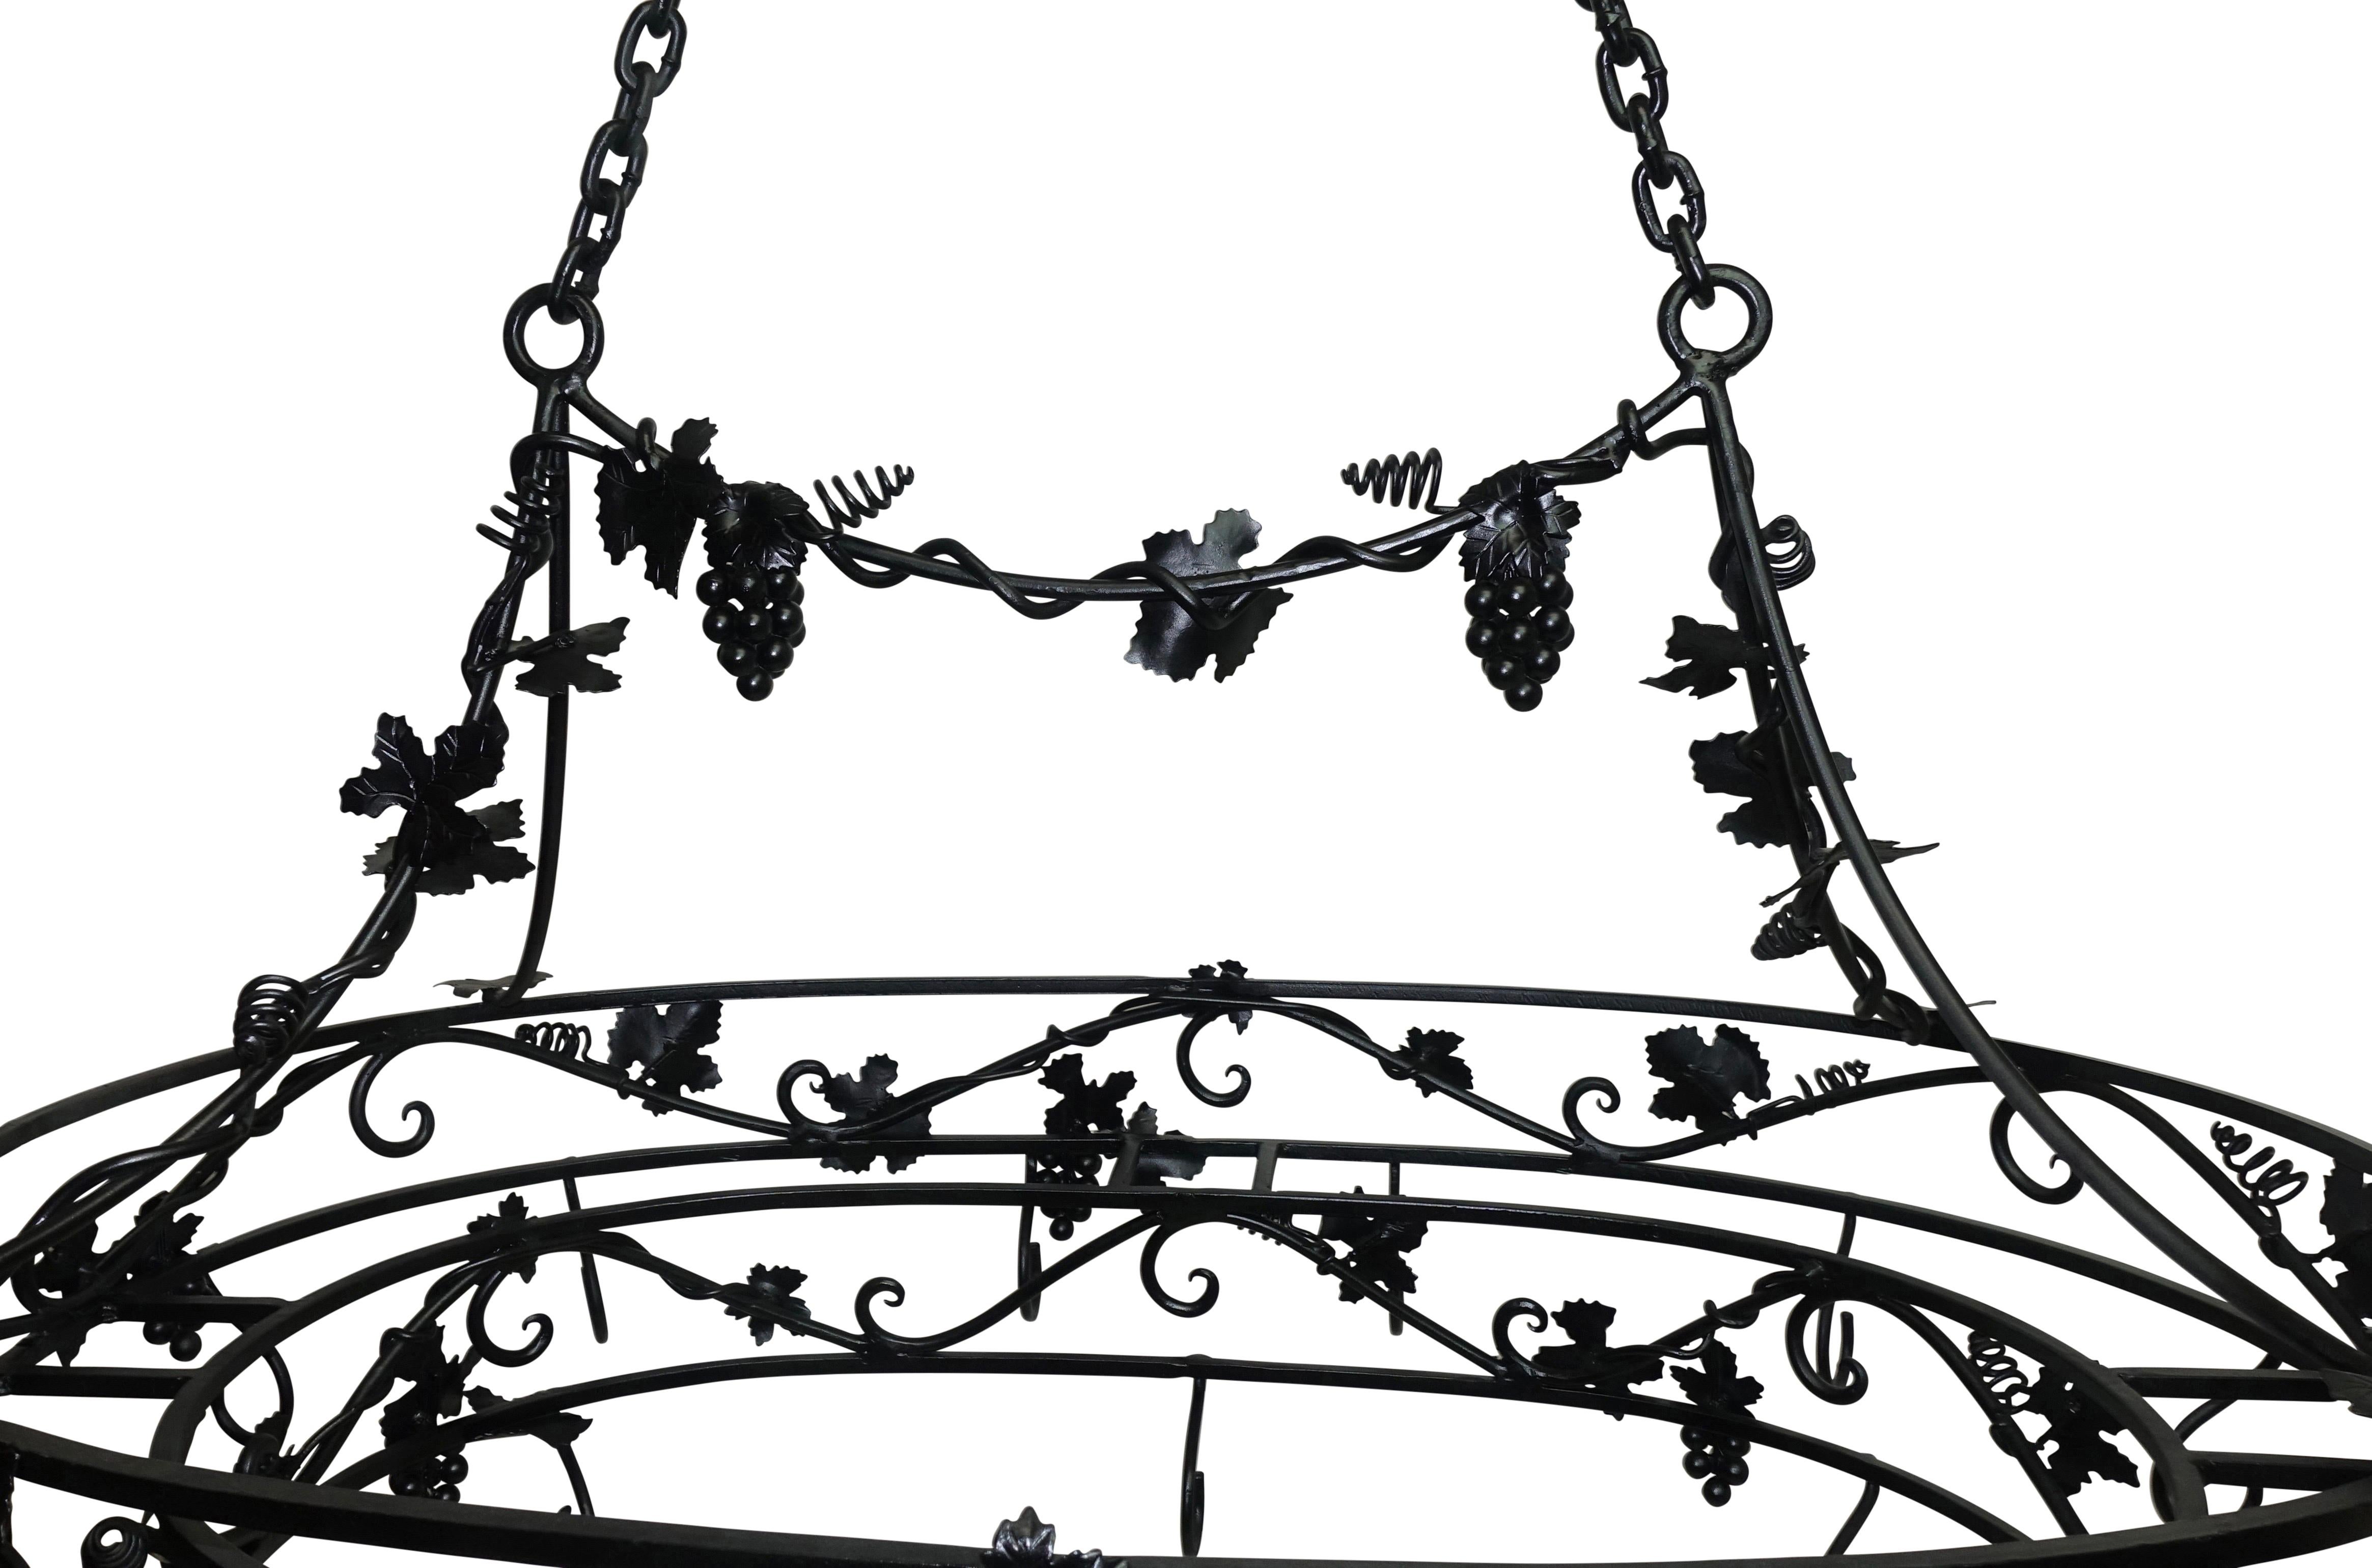 A large oval shape wrought iron hanging pot rack with clusters of grapes and leaves. Having two tiers of hanging hooks, the lowest tier with six stationary hooks and the larger oval tier with twelve stationary hooks, suspended from a double brass